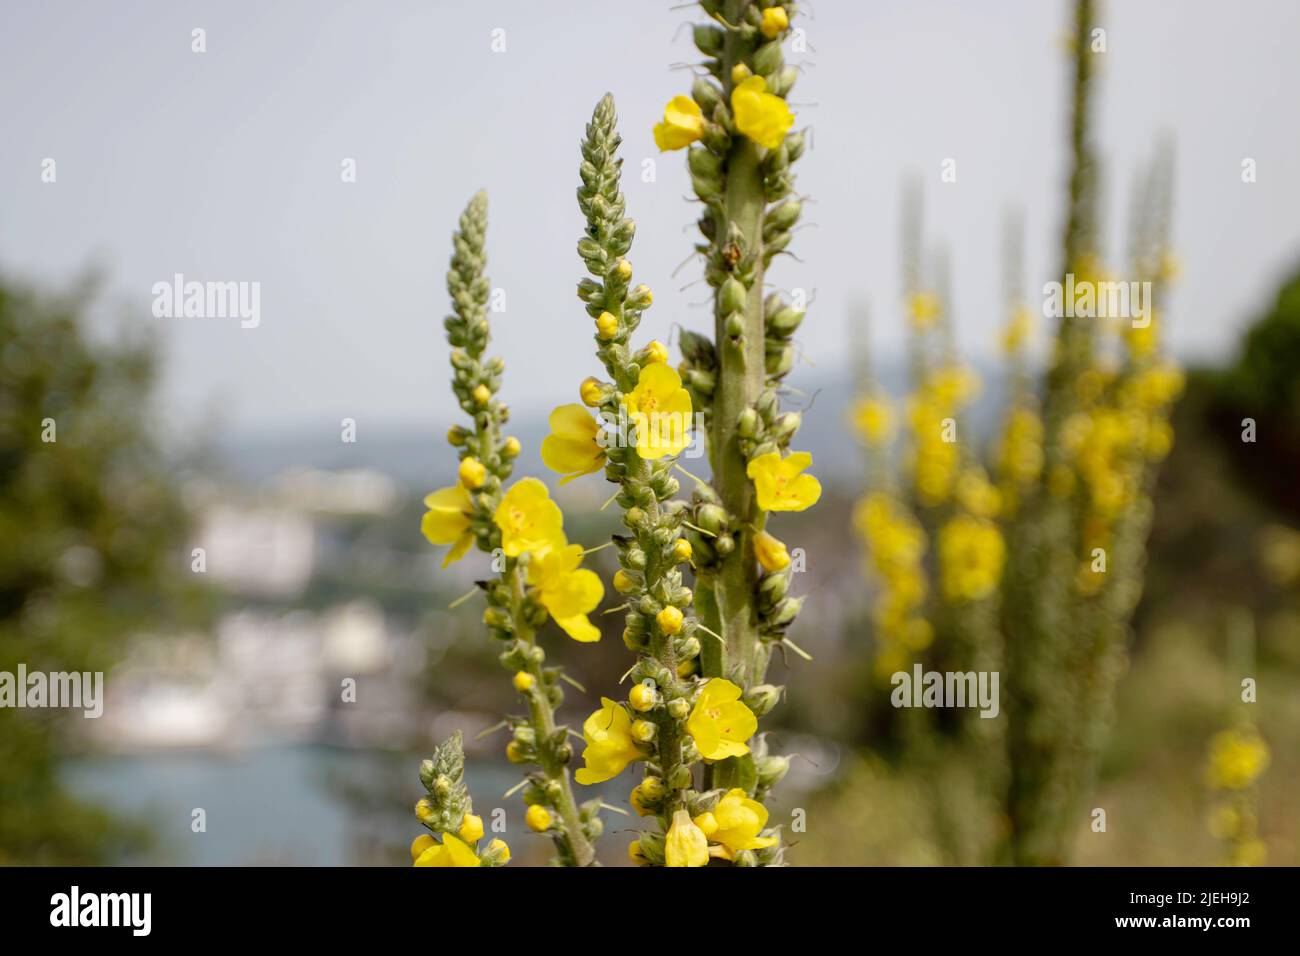 Common mullein or verbascum thapsus yellow flowers and buds. Herbal medicine plant. Stock Photo